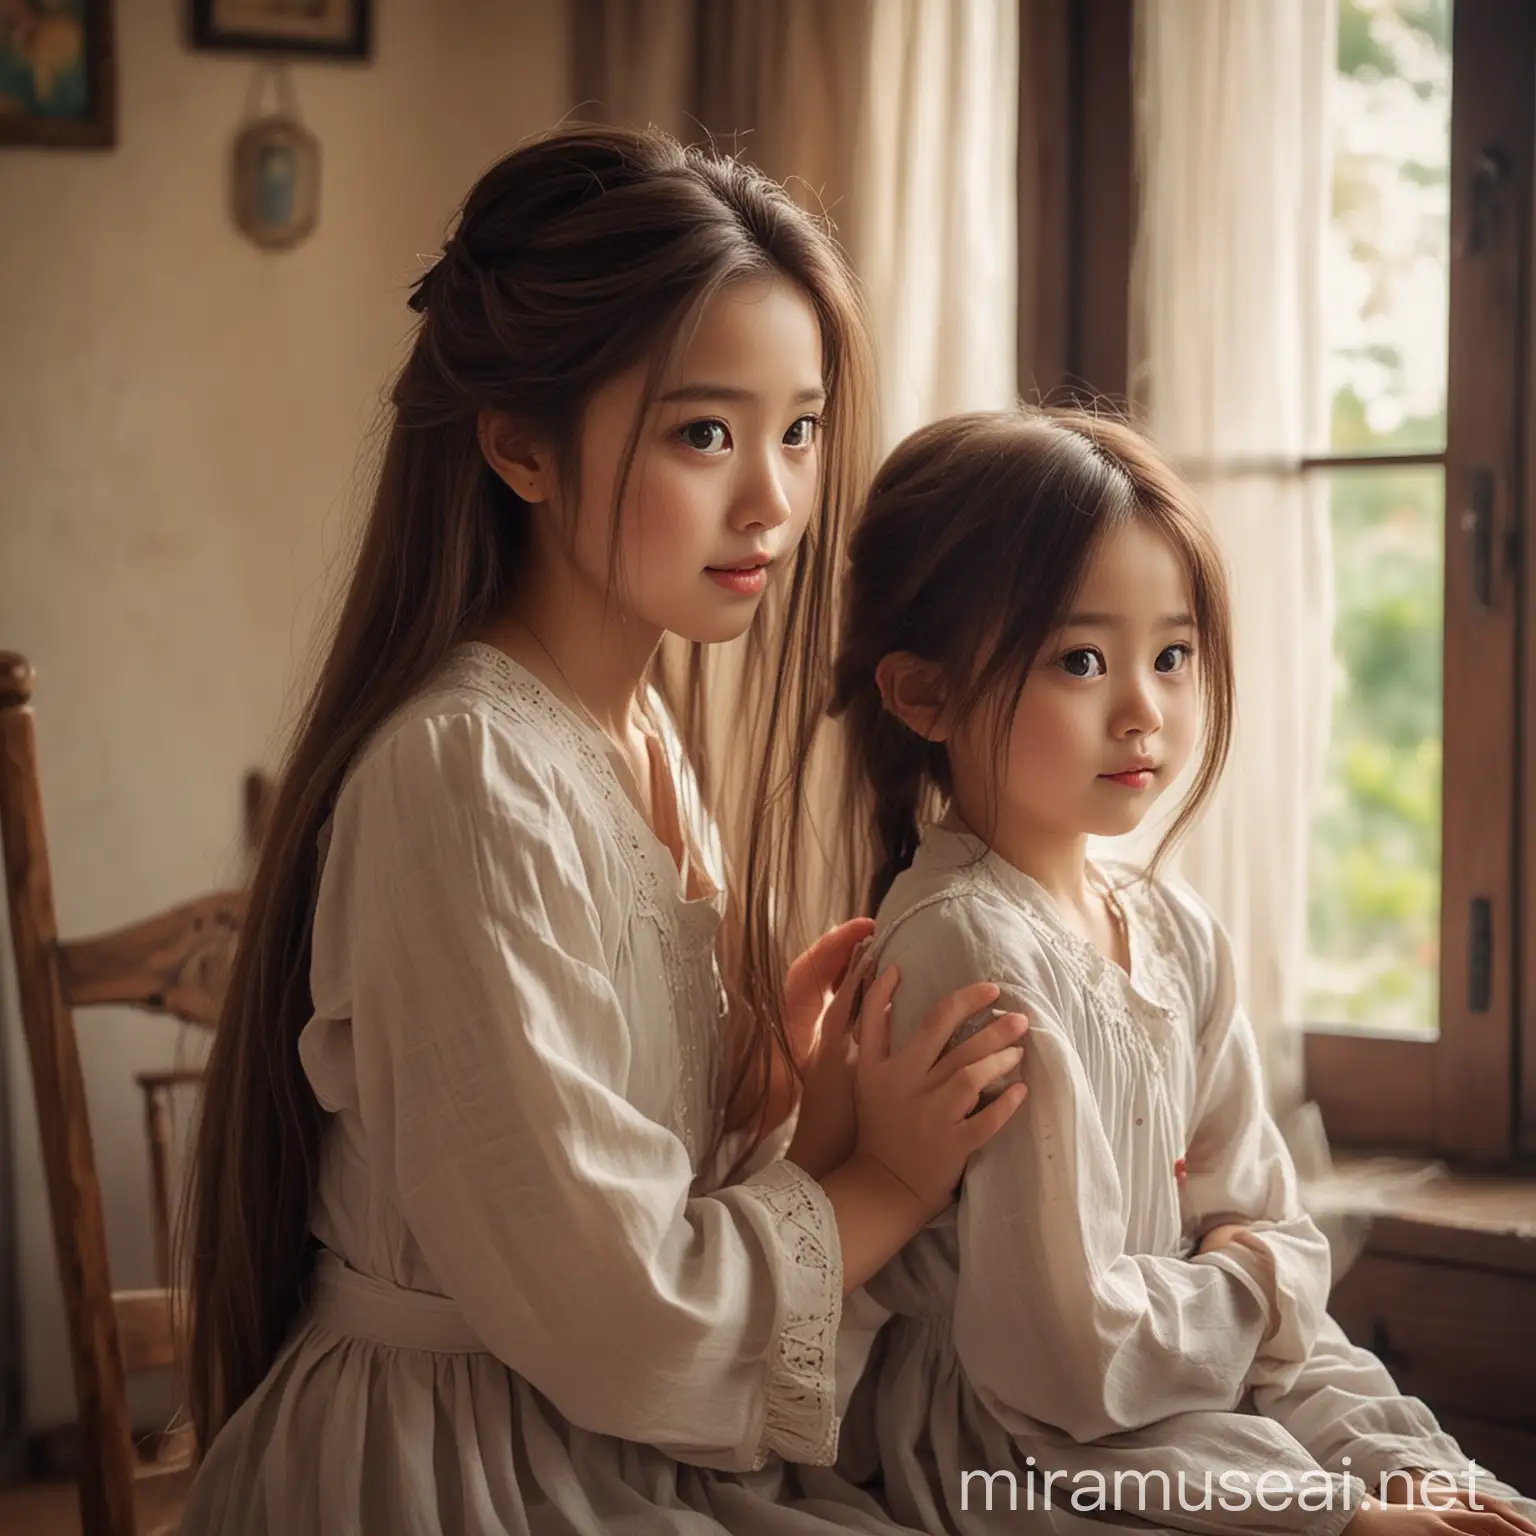 "Generate an image featuring a cute and beautiful Asian girl with big innocent eyes. She is tall, fair-skinned, and wearing a long frock. She has long, flowing hair cascading down her back. The girl is sitting inside a cozy room. Beside her is a handsome, fair-skinned boy with a well-shaped beard on his face. He is sitting behind the girl and gently combing her hair. The boy has lovely, sharp eyes and is looking at the girl with affection. The atmosphere is warm and loving. Please ensure that the girl's hair is portrayed as long and luscious, and that both characters have engaging expressions reflecting their affection for each other."